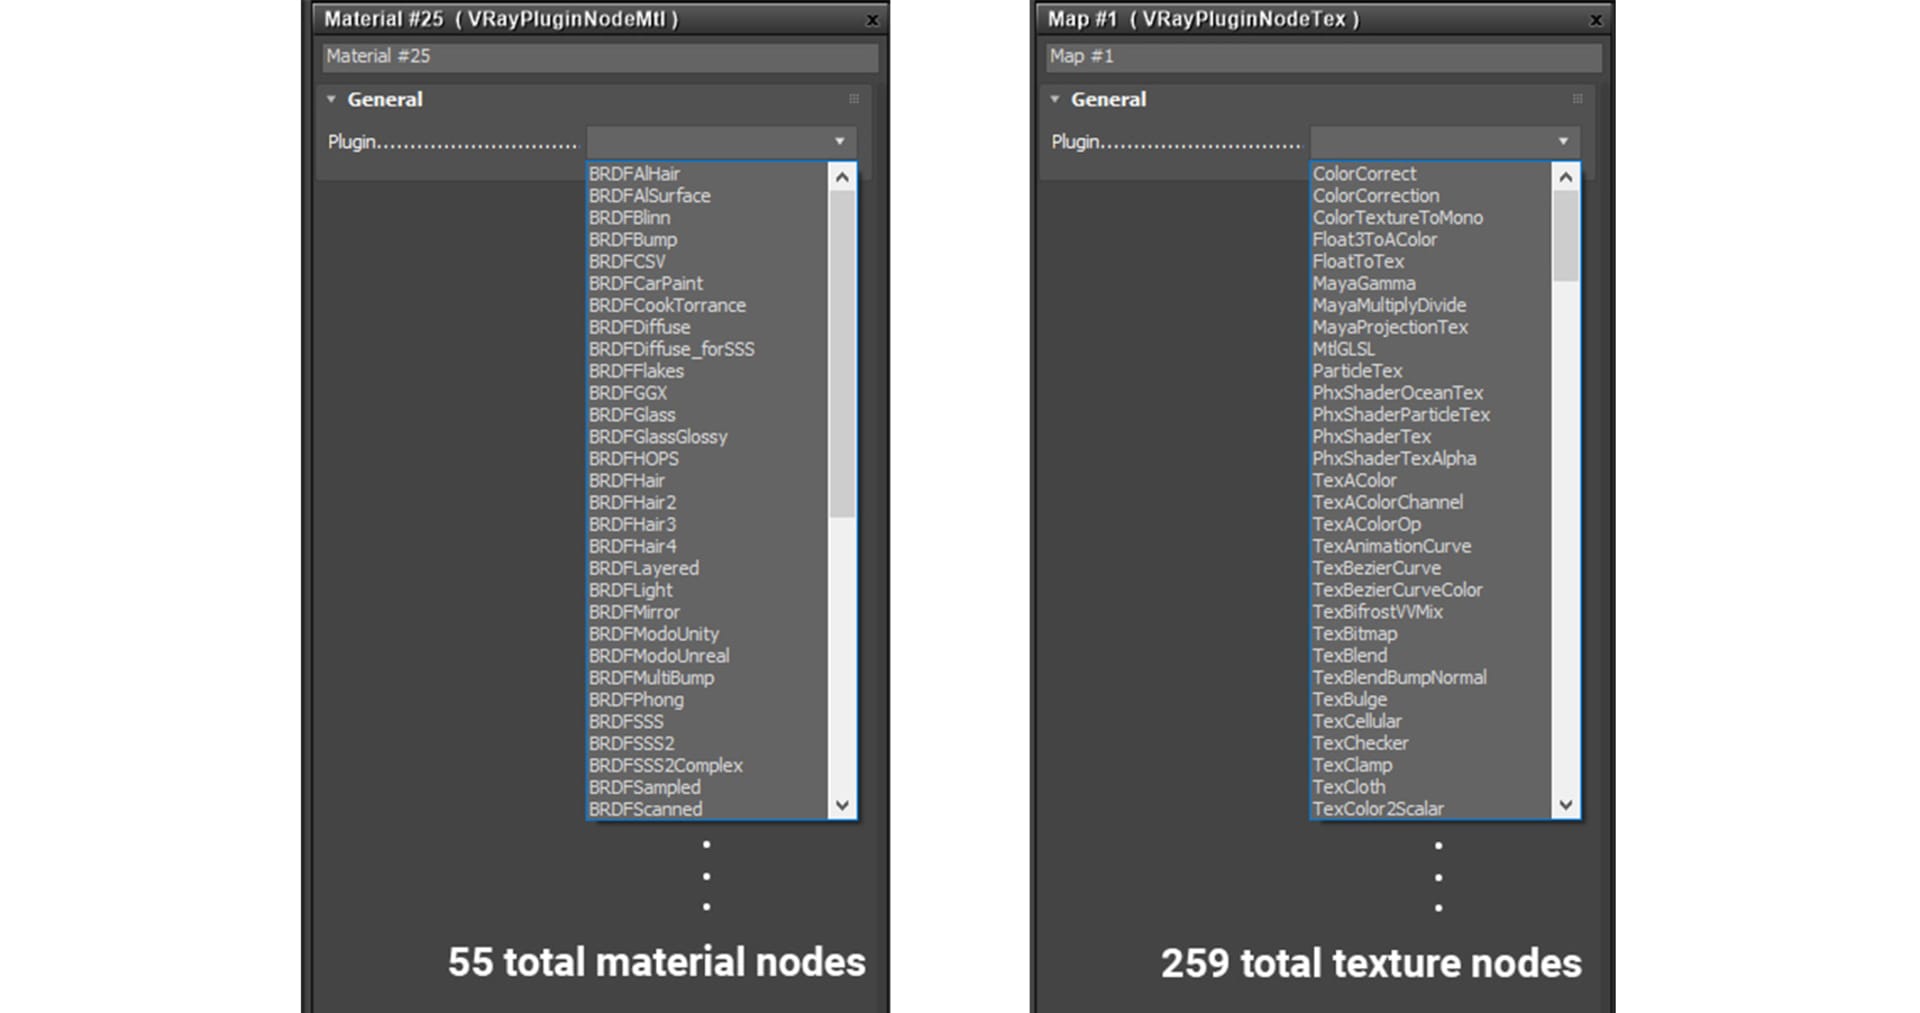 opening a vray material library created in a newer version